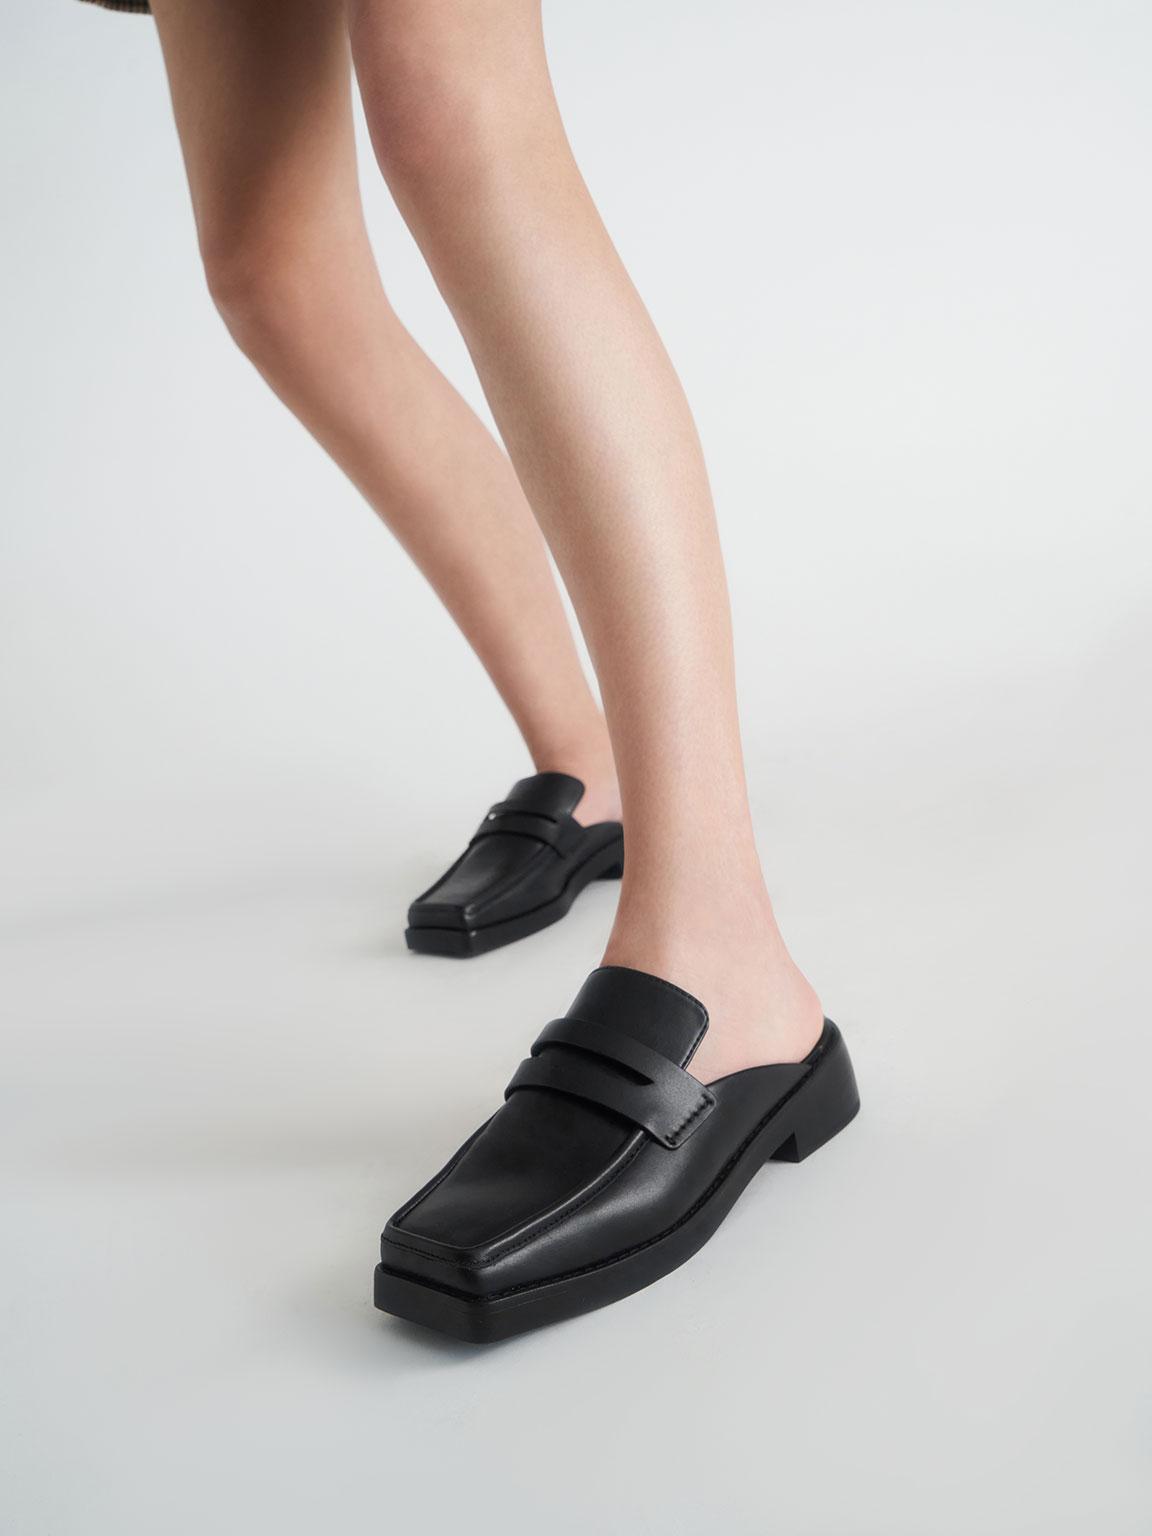 Charles & Keith Square Toe Penny Loafer Mules in Black | Lyst